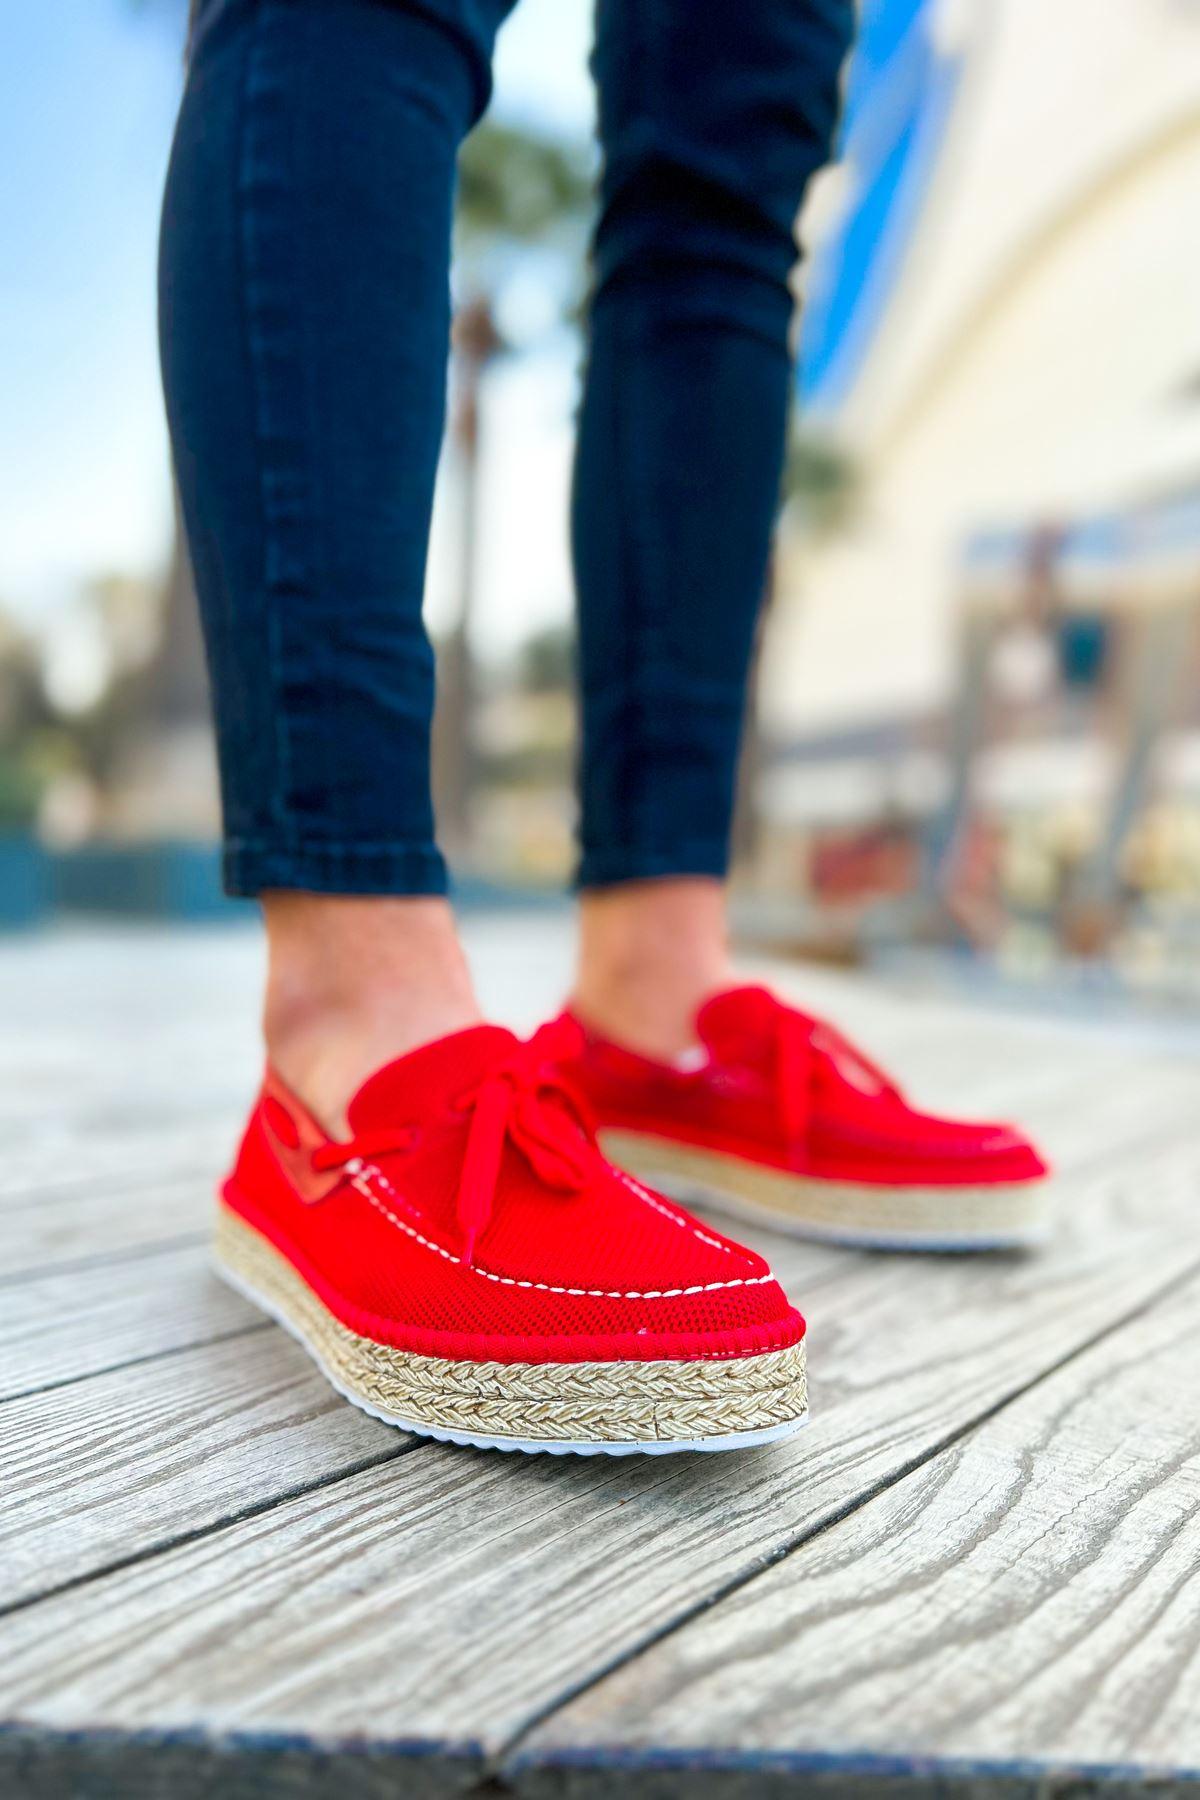 CH311 Espadril Men's sneakers Shoes RED - STREET MODE ™